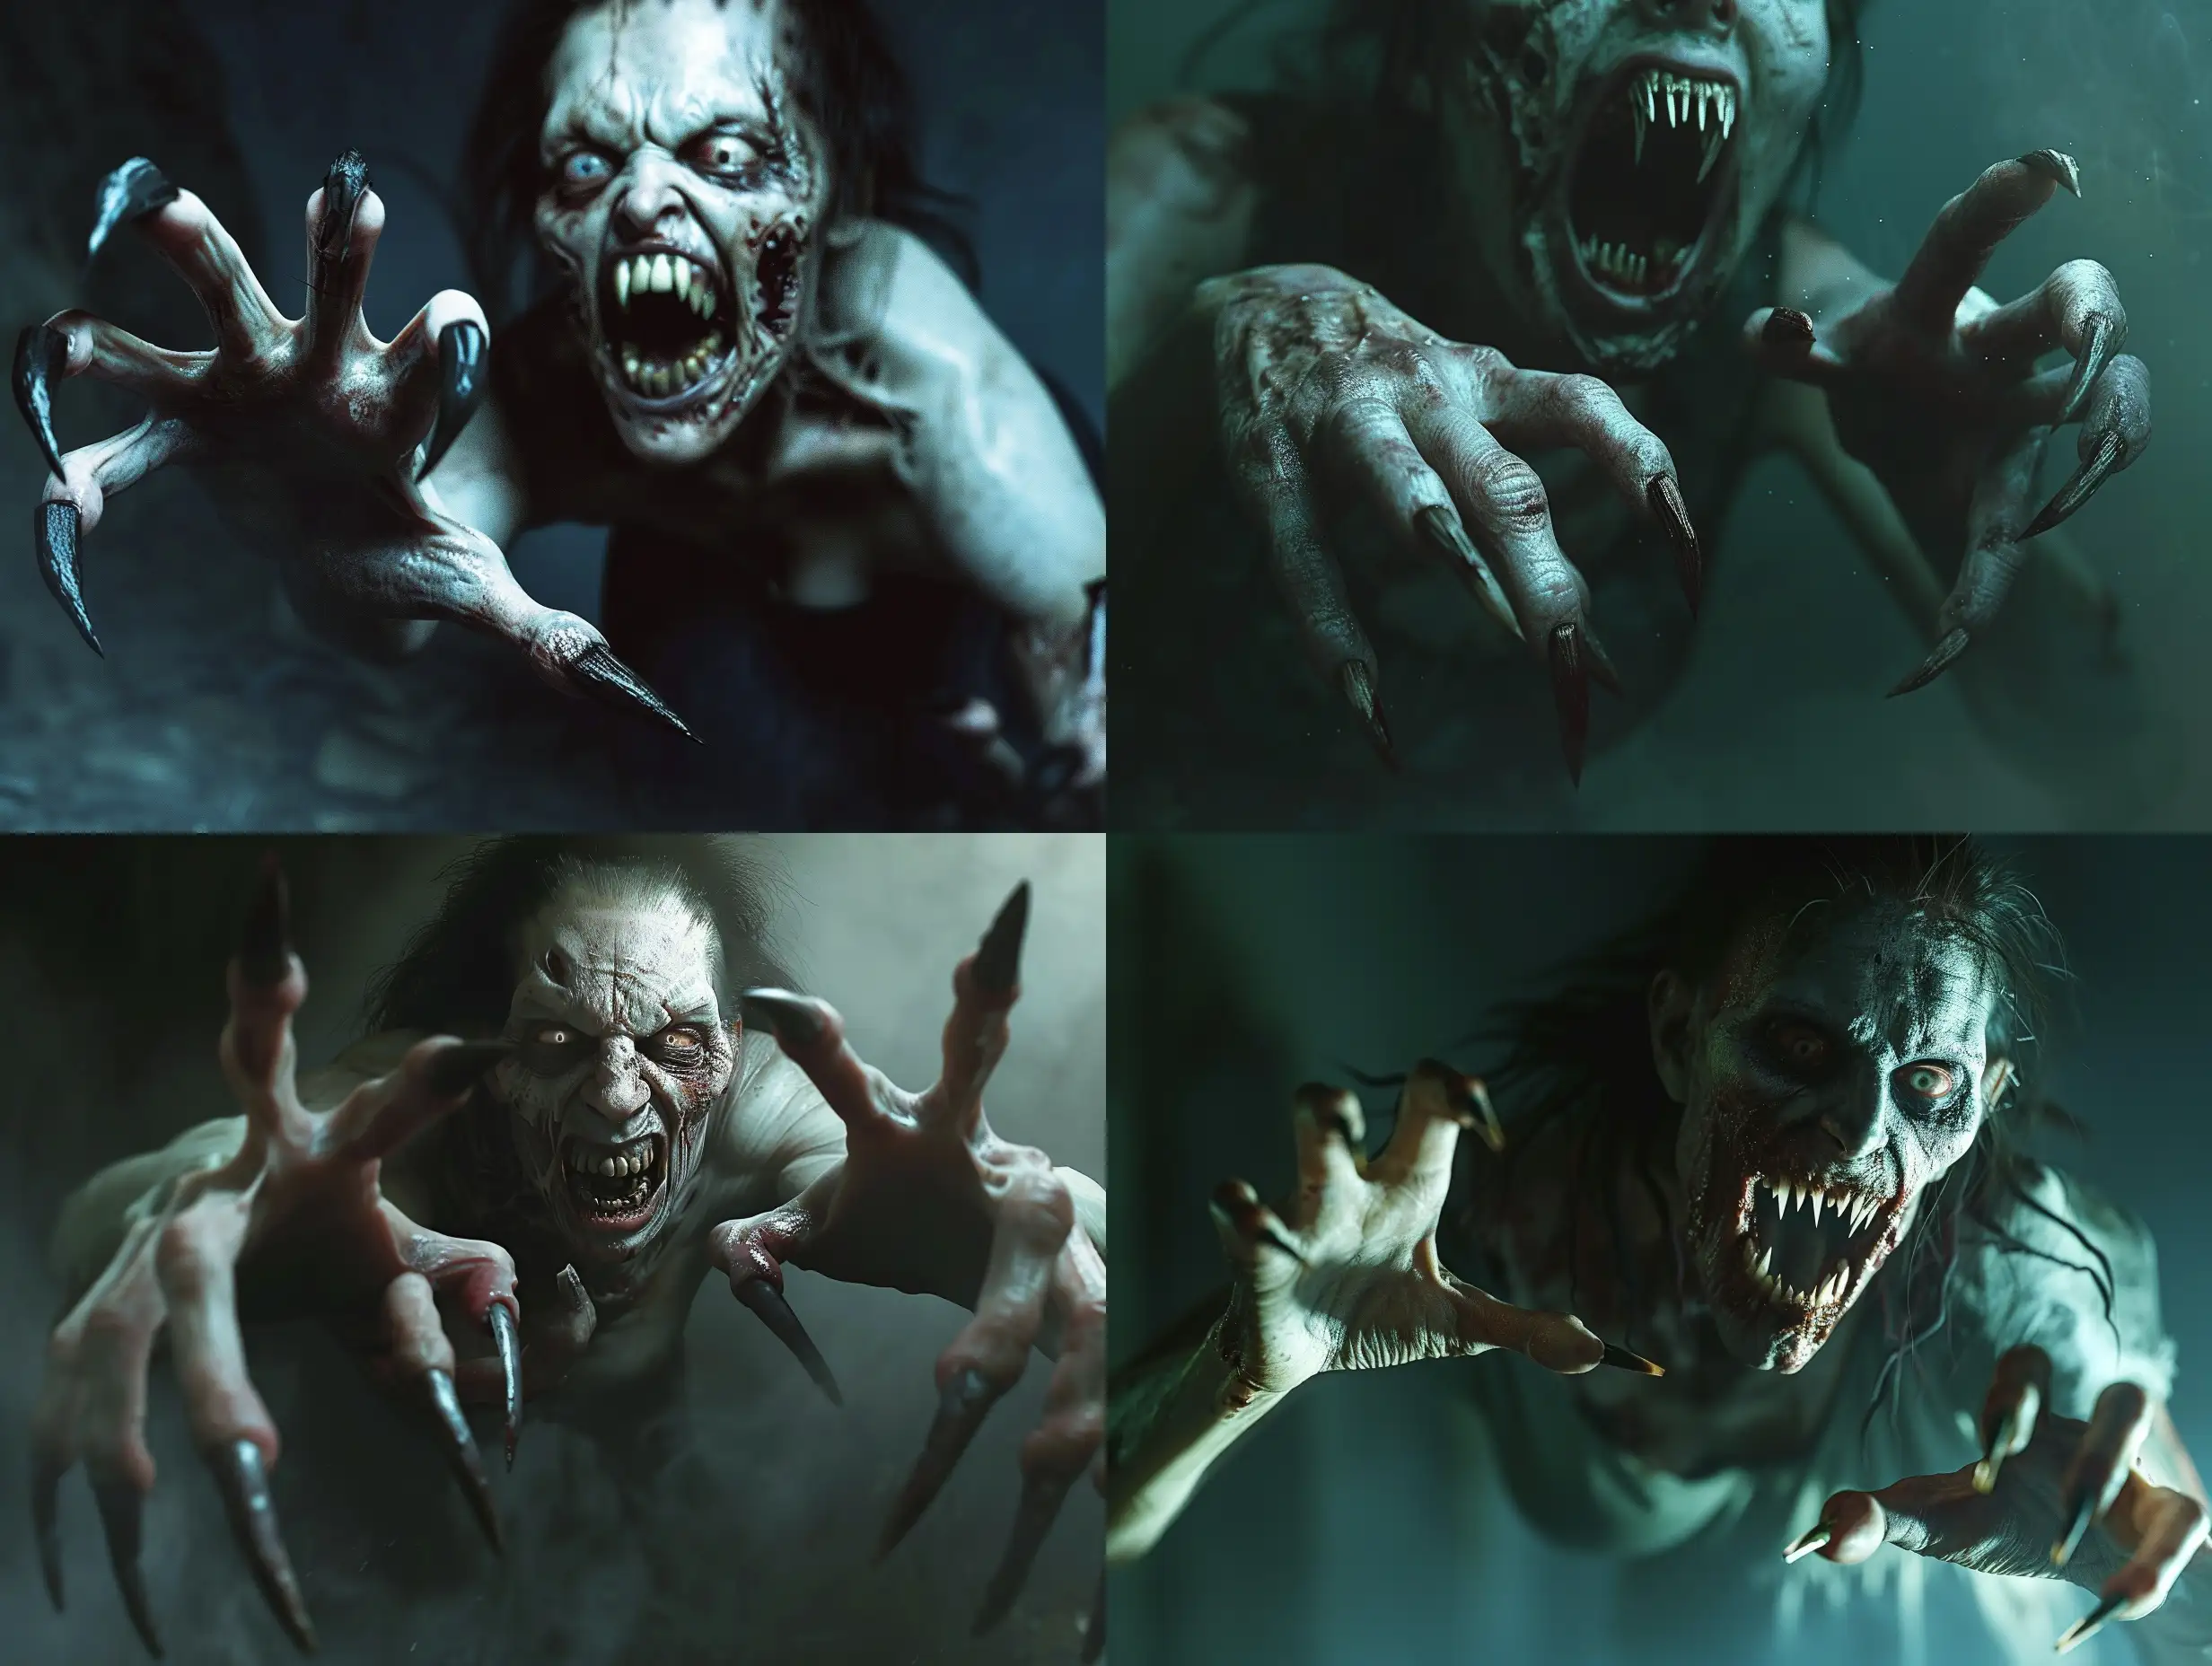 A hauntingly realistic scene of a nightmarish hungry zombie woman with clawed hands, her mouth agape, revealing a frightening display of pointed teeth resembling predatory fangs. She appears to be lurching towards you with long, pointed nails that are almost grotesquely reminiscent of beast claws. The woman's pale, rotting skin seems to glow in the darkness, accentuating her unnatural, zombie-like appearance. The surrounding environment is shrouded in darkness, hyper-realism, cinematic, high detail, photo detailing, high quality, photorealistic, aggressive, dark atmosphere, realistic, the smallest details, detailed nails, horror, atmospheric lighting, full anatomical, photorealism, detailed, textured, dark, haunting, night-time scene, intense, creepy, undead, spooky, eerie, atmospheric lighting, nightmare, grotesque, terrifying, realistic anatomy, human hands, very clear without flaws with five fingers.